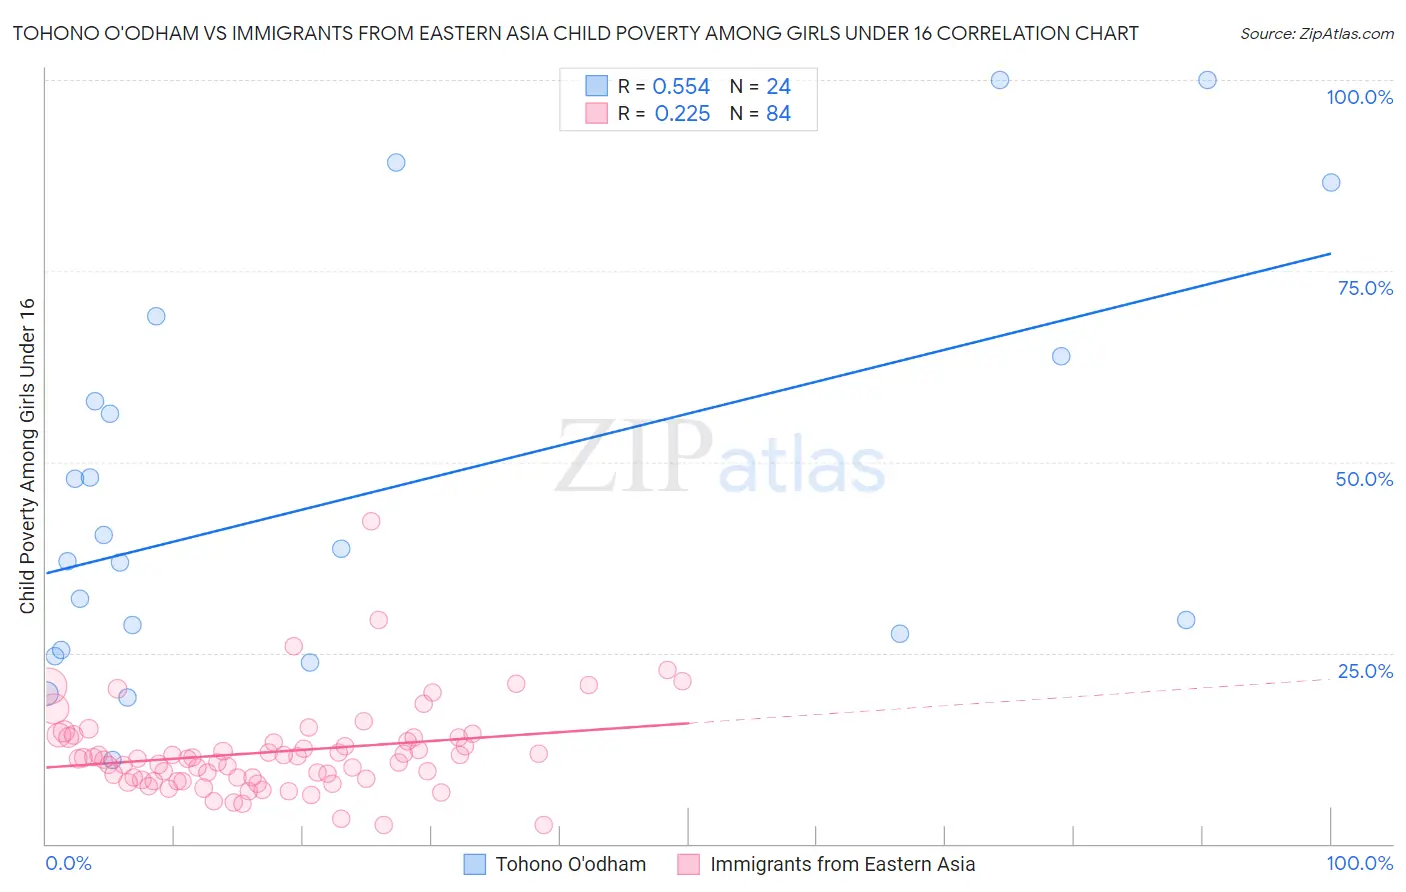 Tohono O'odham vs Immigrants from Eastern Asia Child Poverty Among Girls Under 16